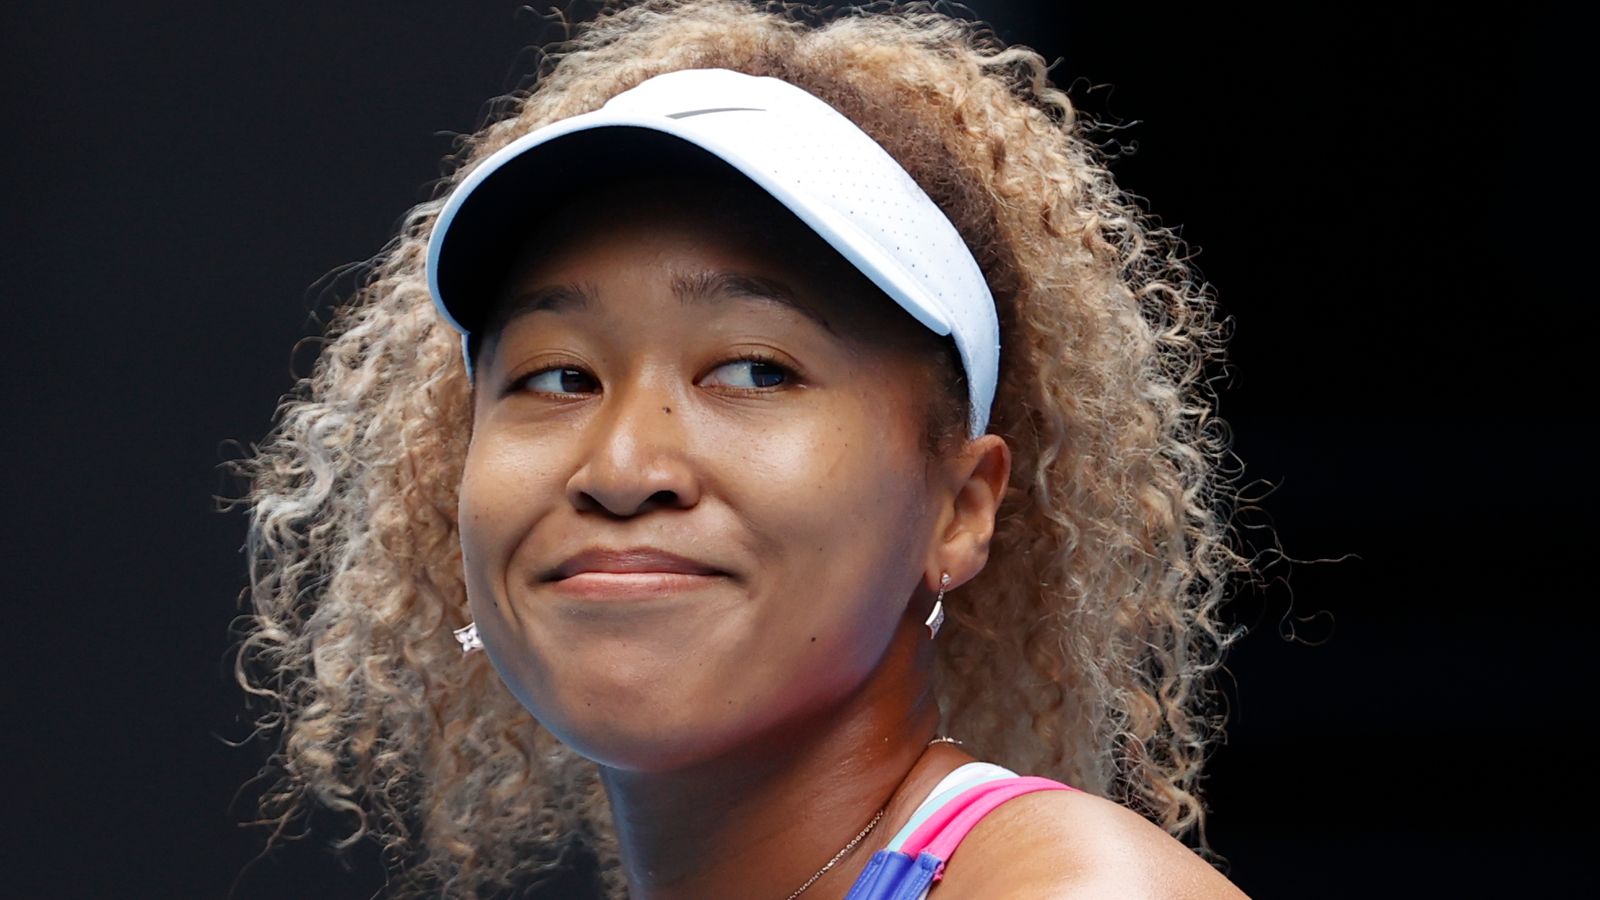 Australian Open: Naomi Osaka hits ground running in Melbourne with opening win